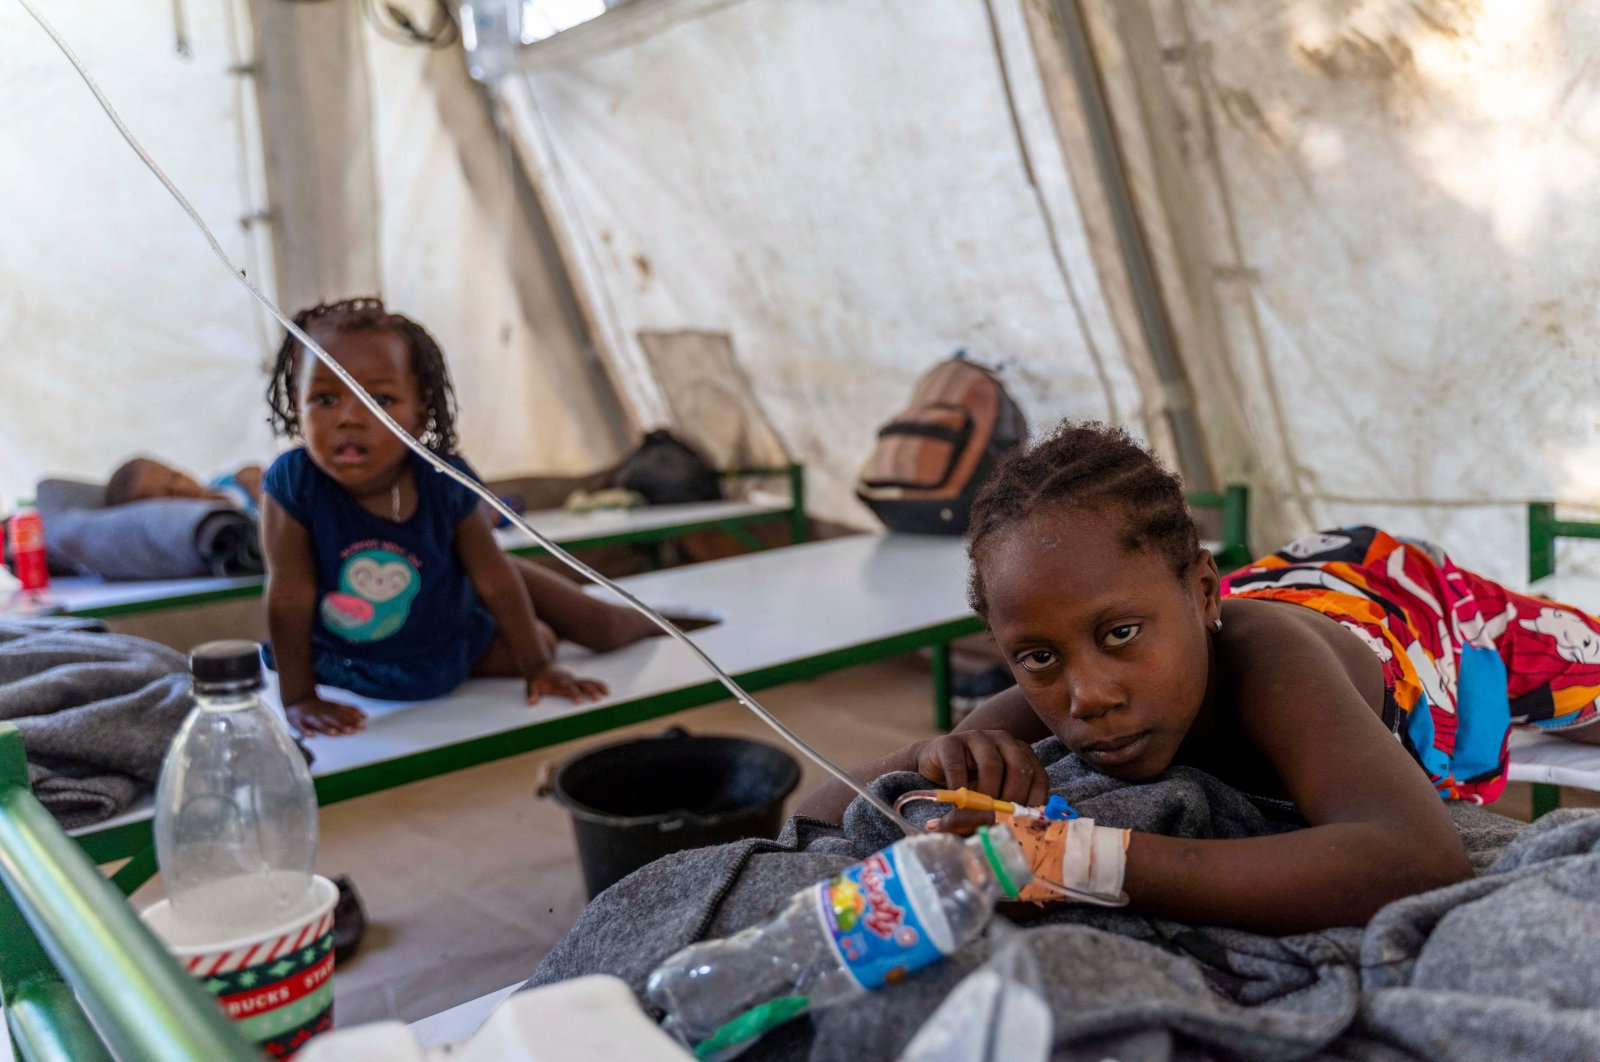 Children showing symptoms of cholera receive treatment at a clinic run by Doctors Without Borders in Cité Soleil, Port-au-Prince, Haiti, Oct. 7, 2022. (AFP Photo)